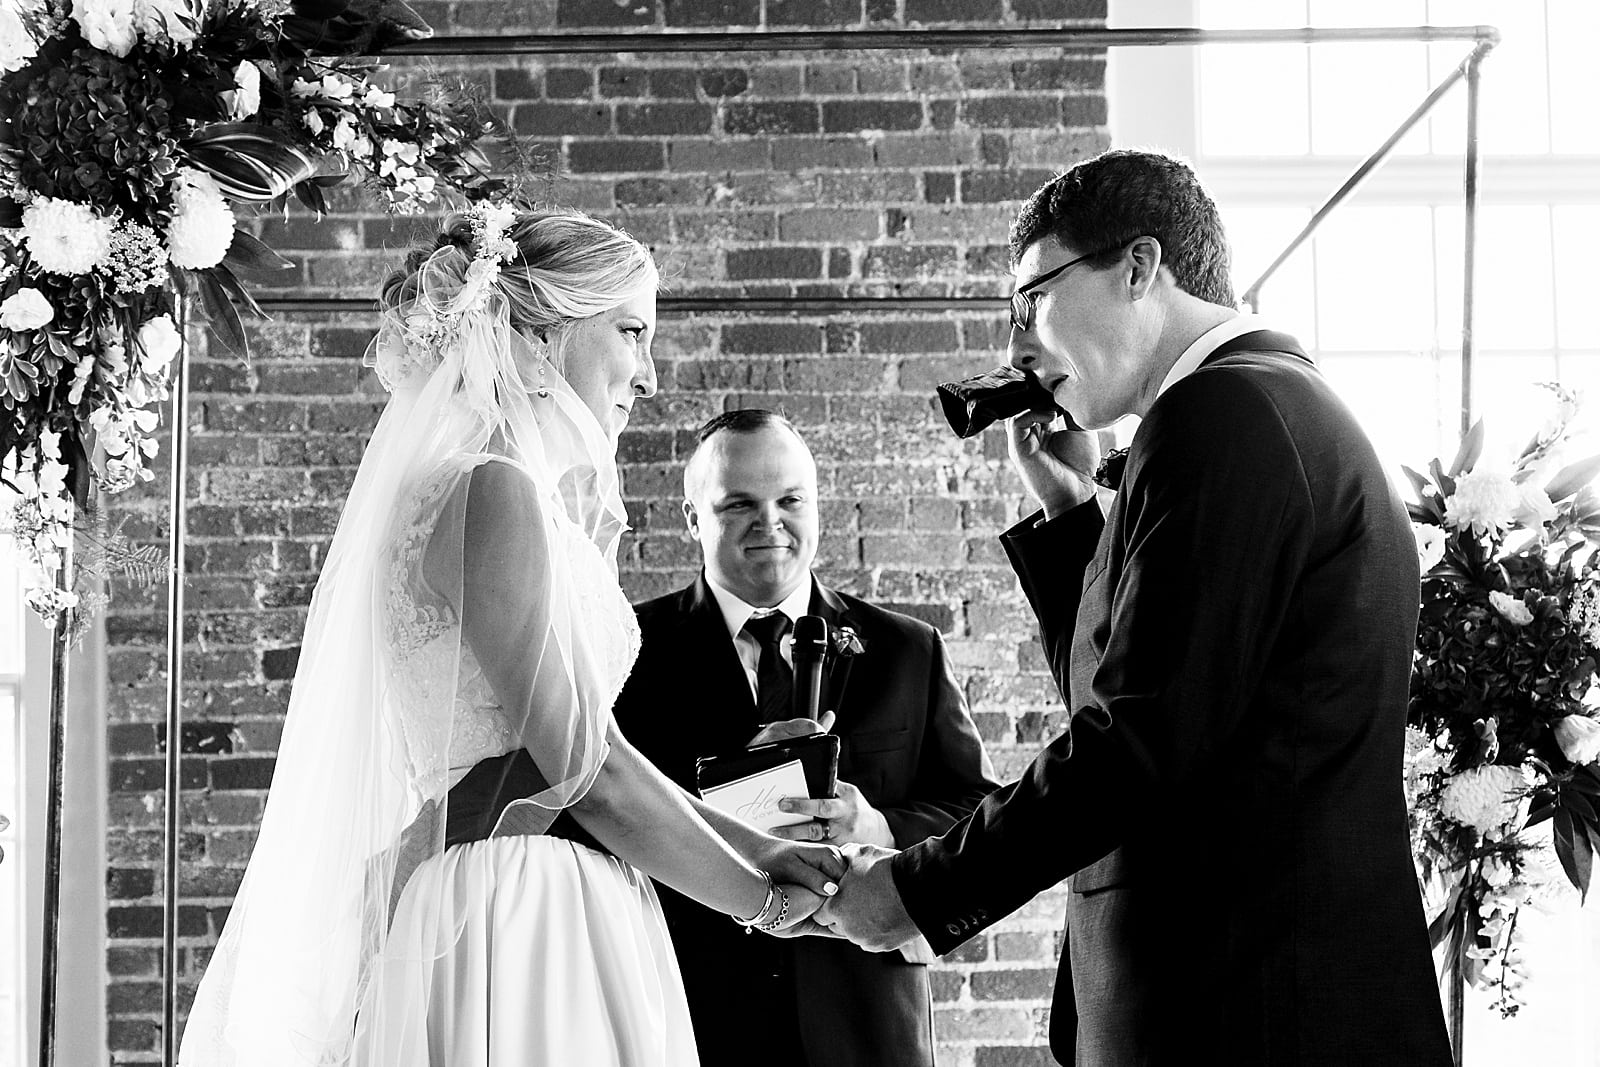 This groom's tearful reactions during the wedding ceremony were priceless. 